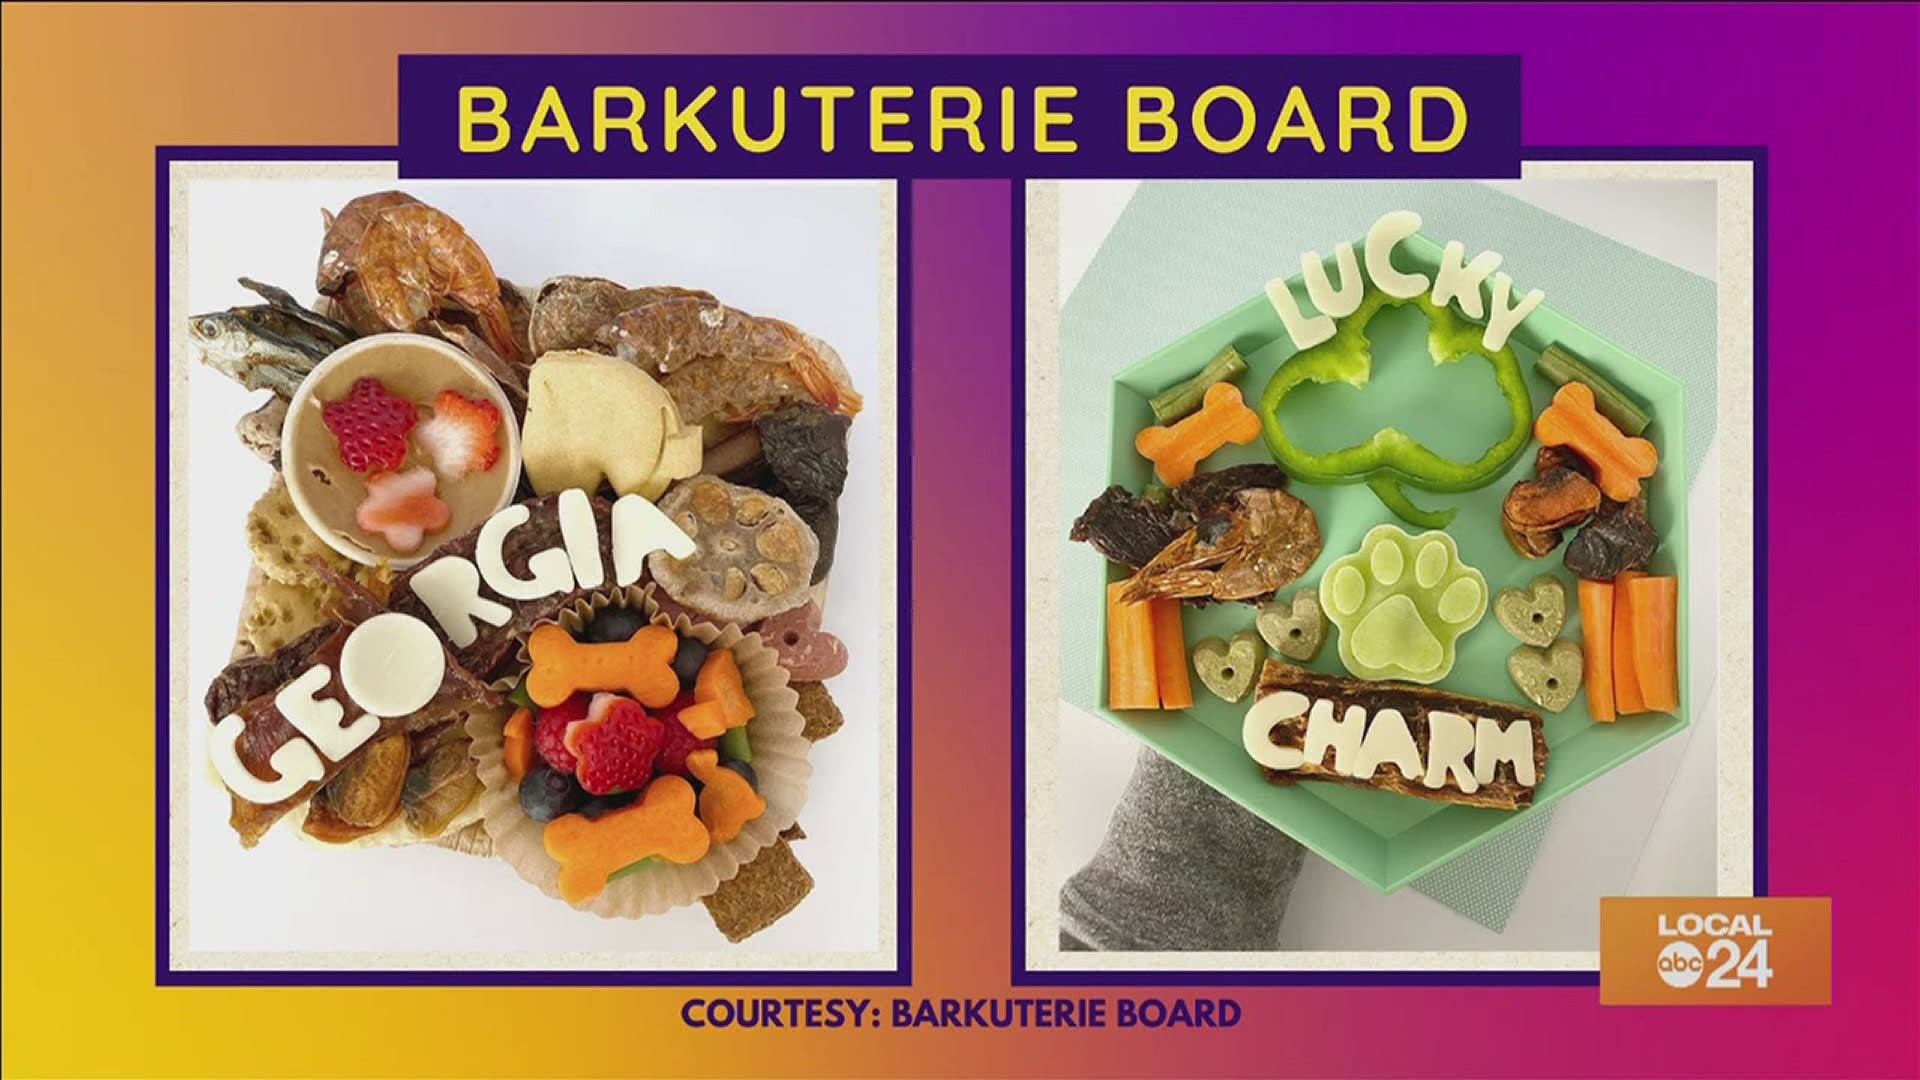 Calling all pet lovers of the world! Bring out the inner artist in you with these barkuterie board ideas! Perfect for dogs and charcuterie board fans alike!